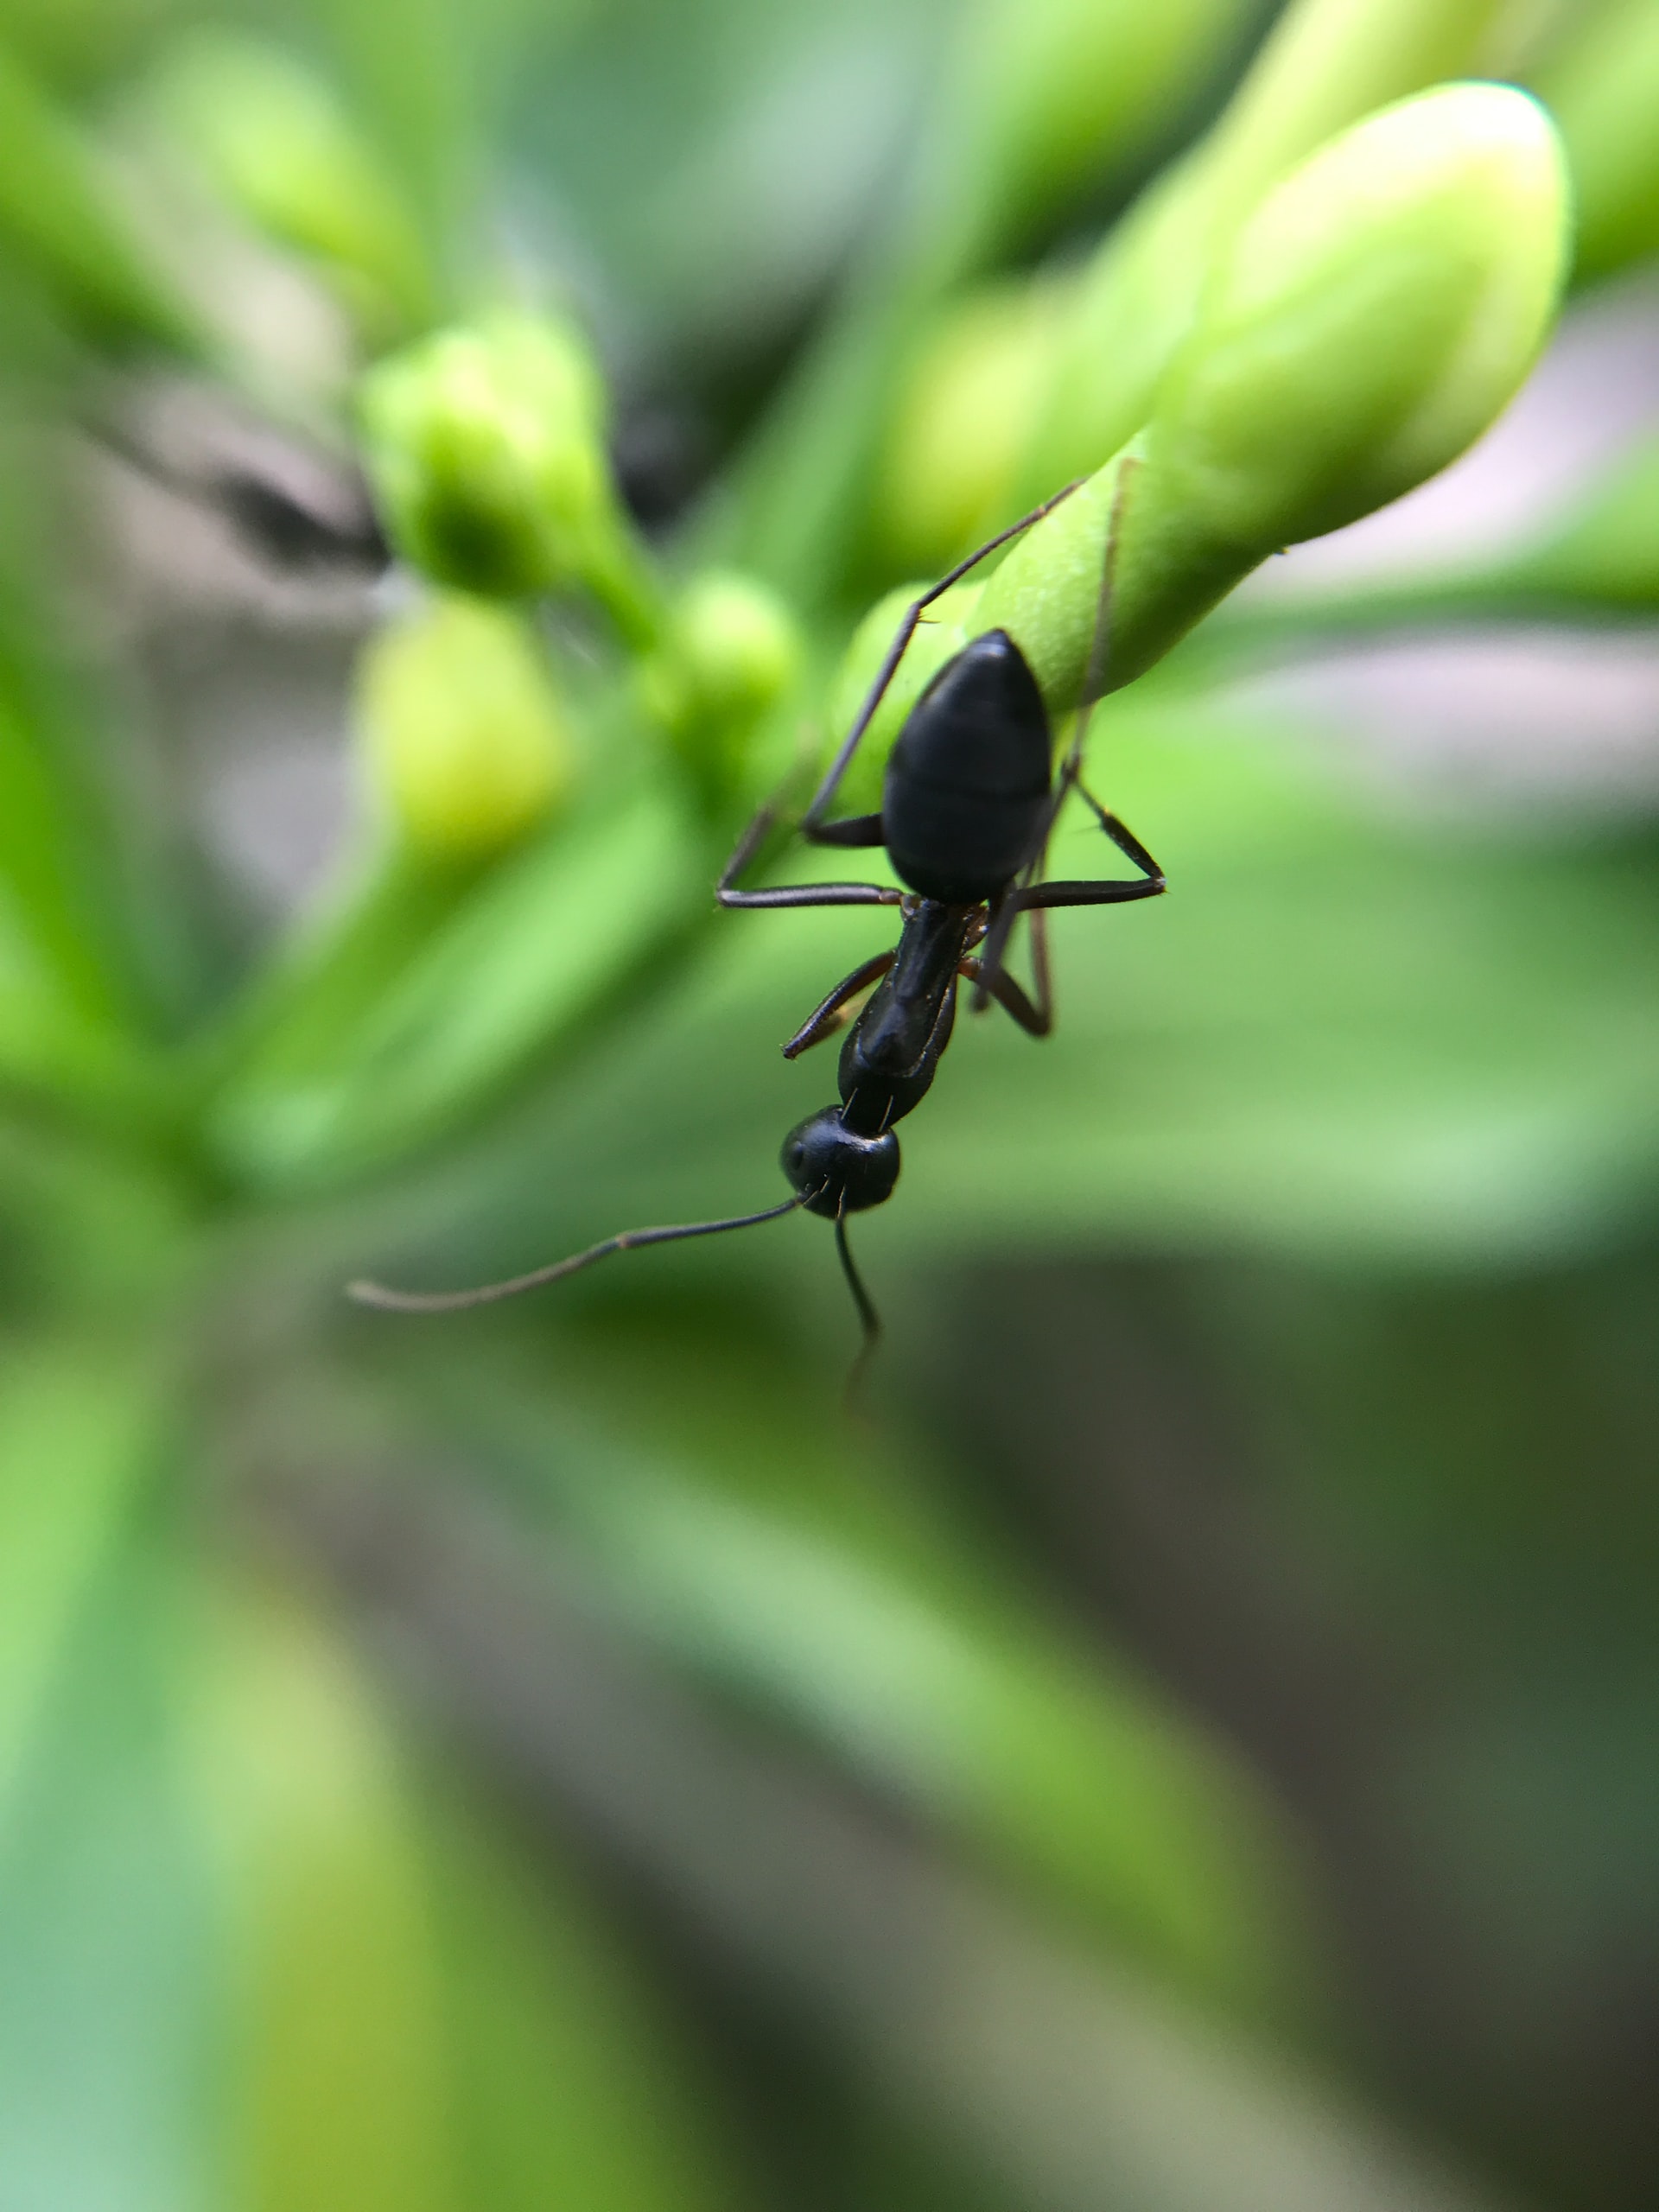 The following exercises use a dataset on ant species richness. Photo: Unitedbee Clicks on Unsplash.